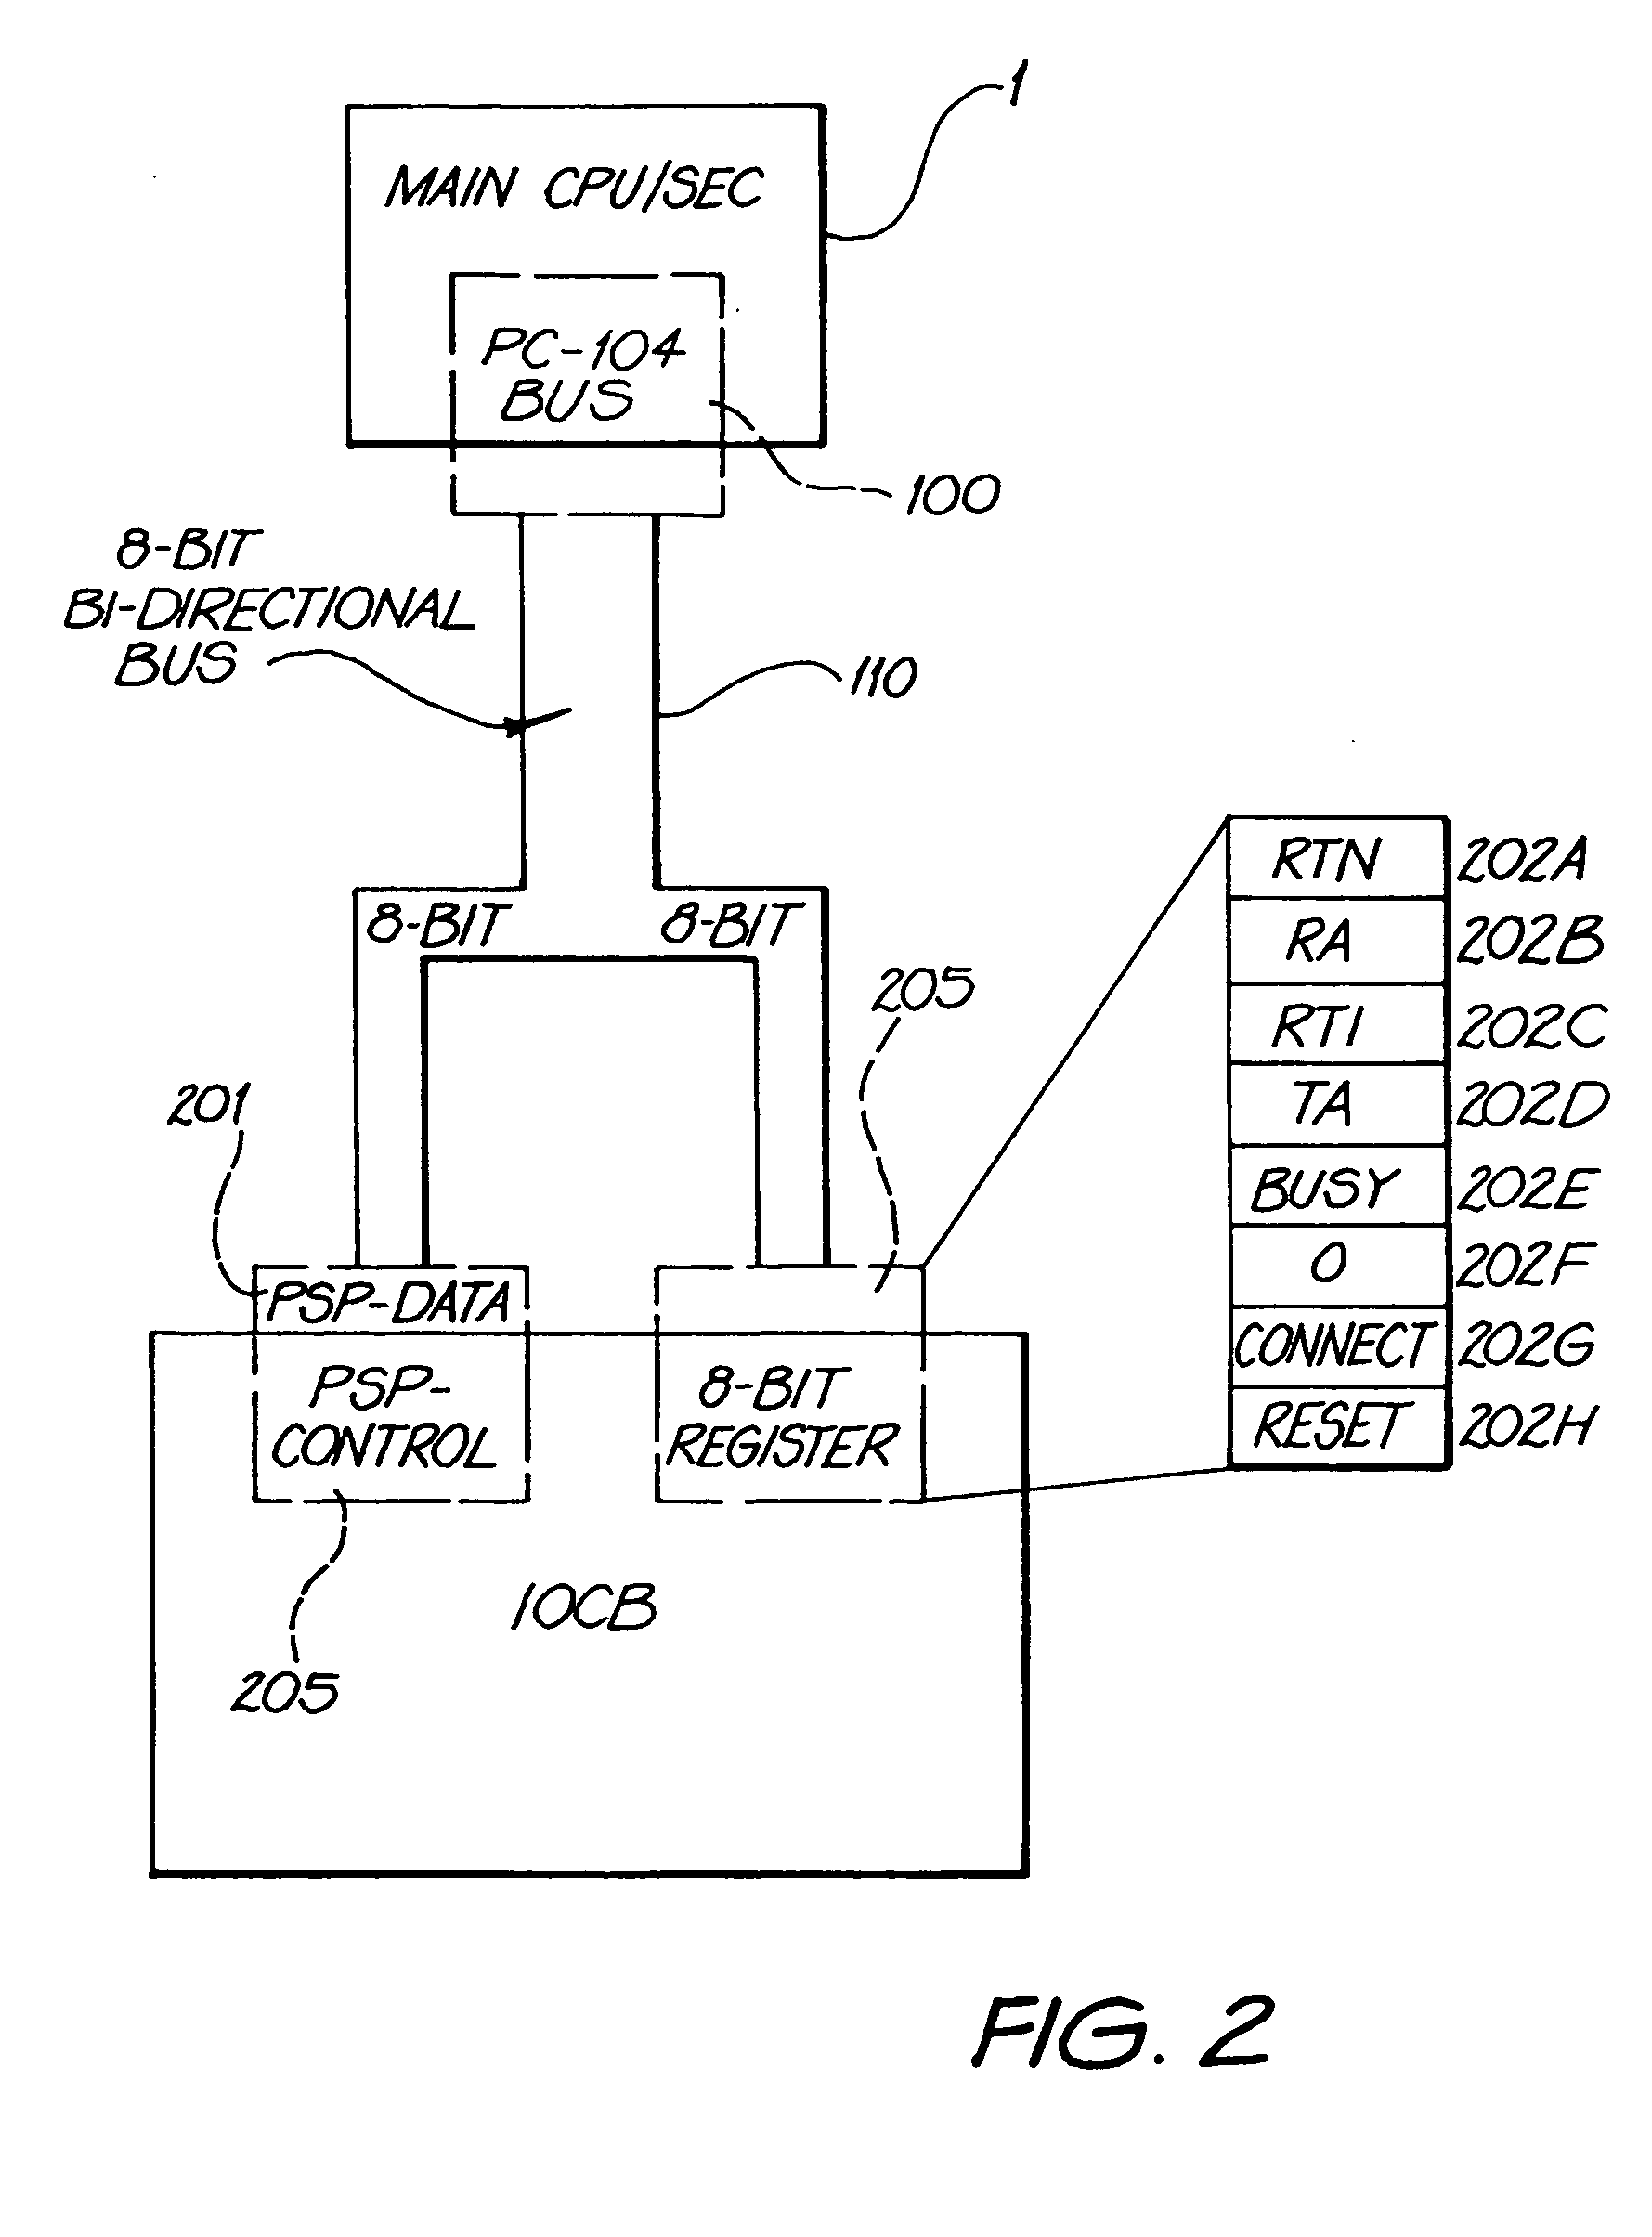 Secured inter-processor and virtual device communications system